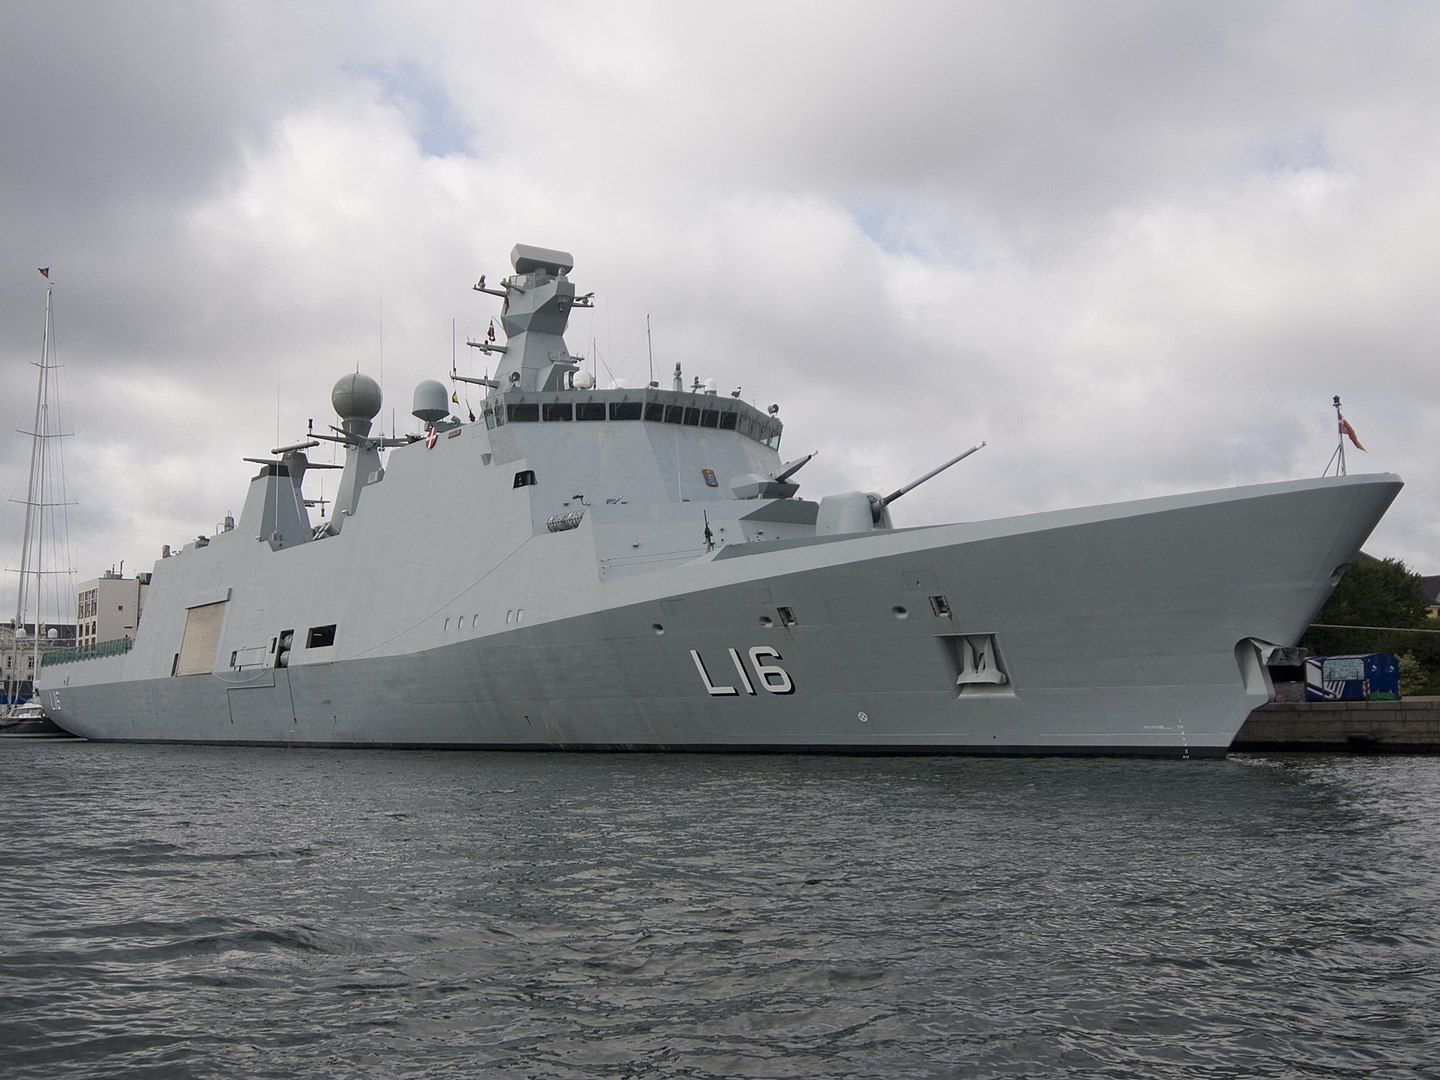 Denmark deploys a vessel contribution in order to fight the pirates in the Gulf of Guinea